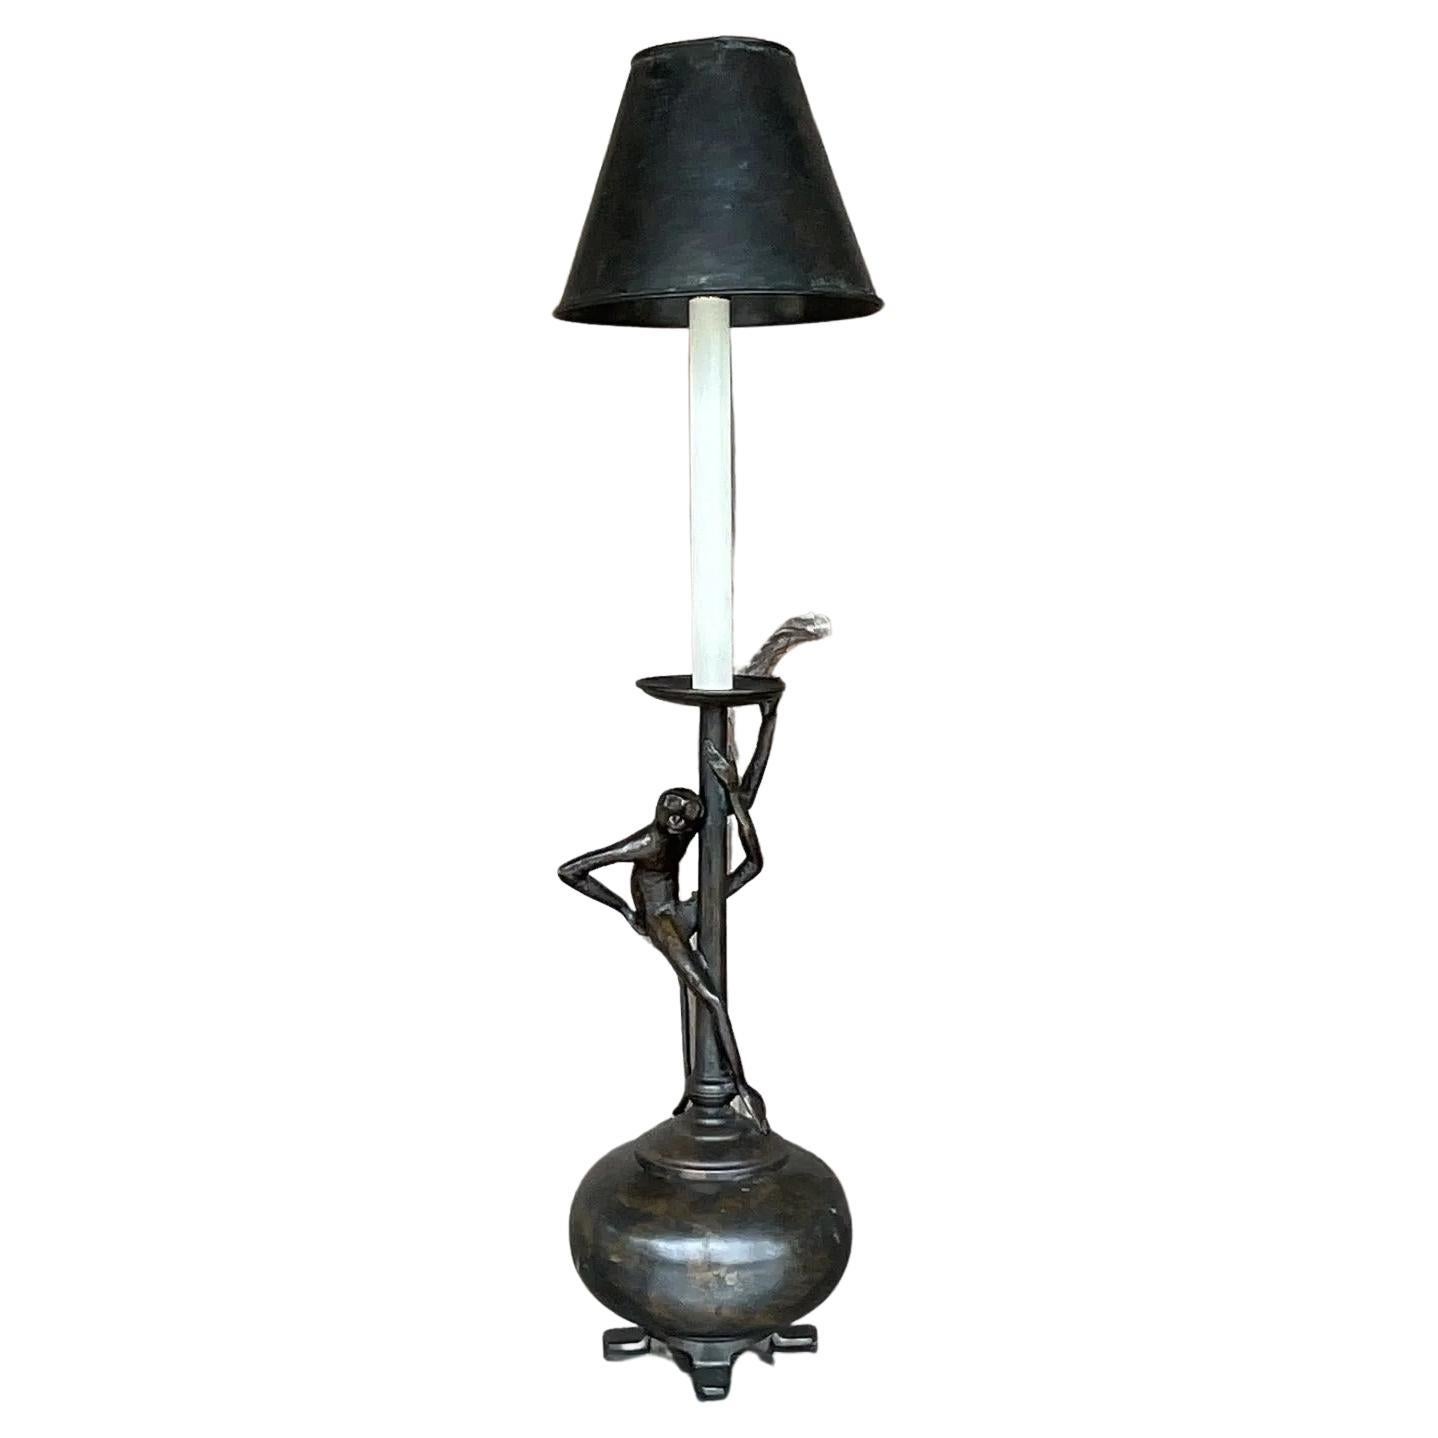 Which company is best for table lamps?